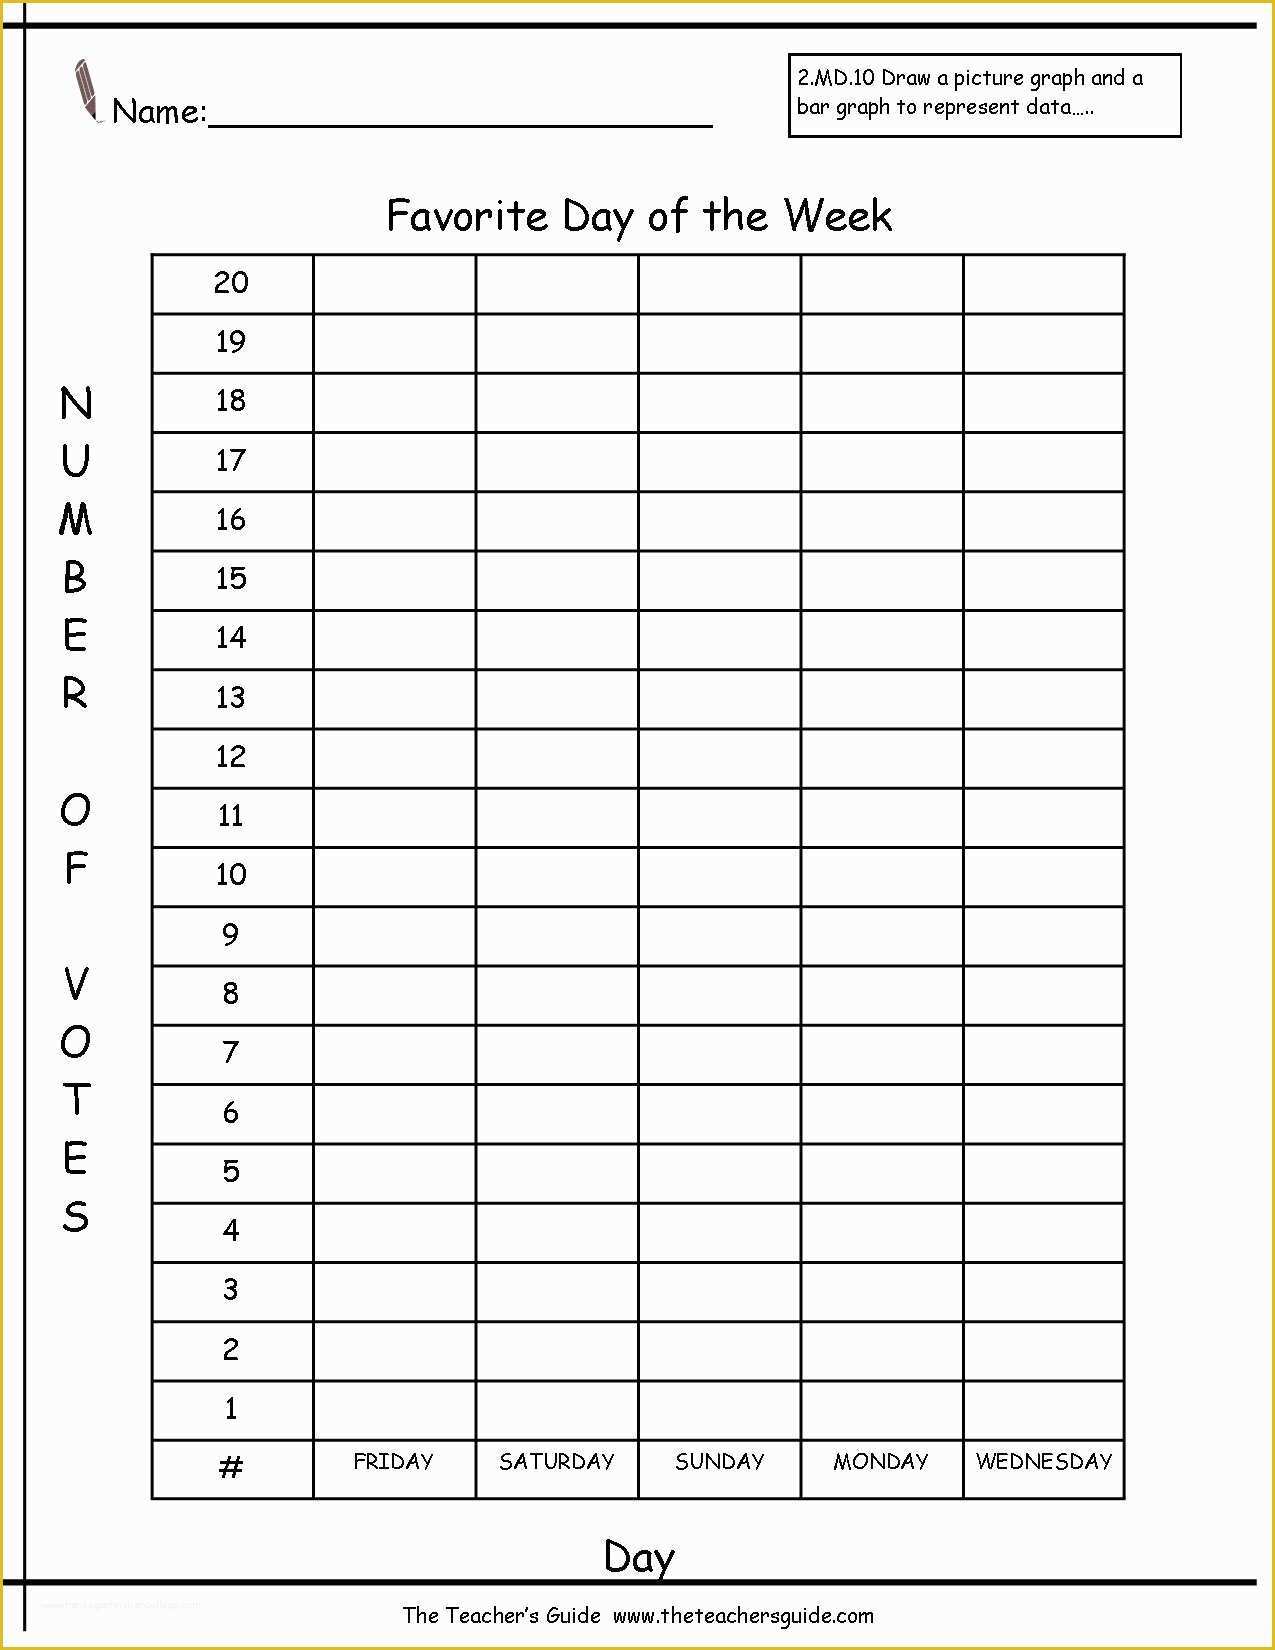 Free Graph Chart Templates Of Reading and Creating Bar Graphs Worksheets From the